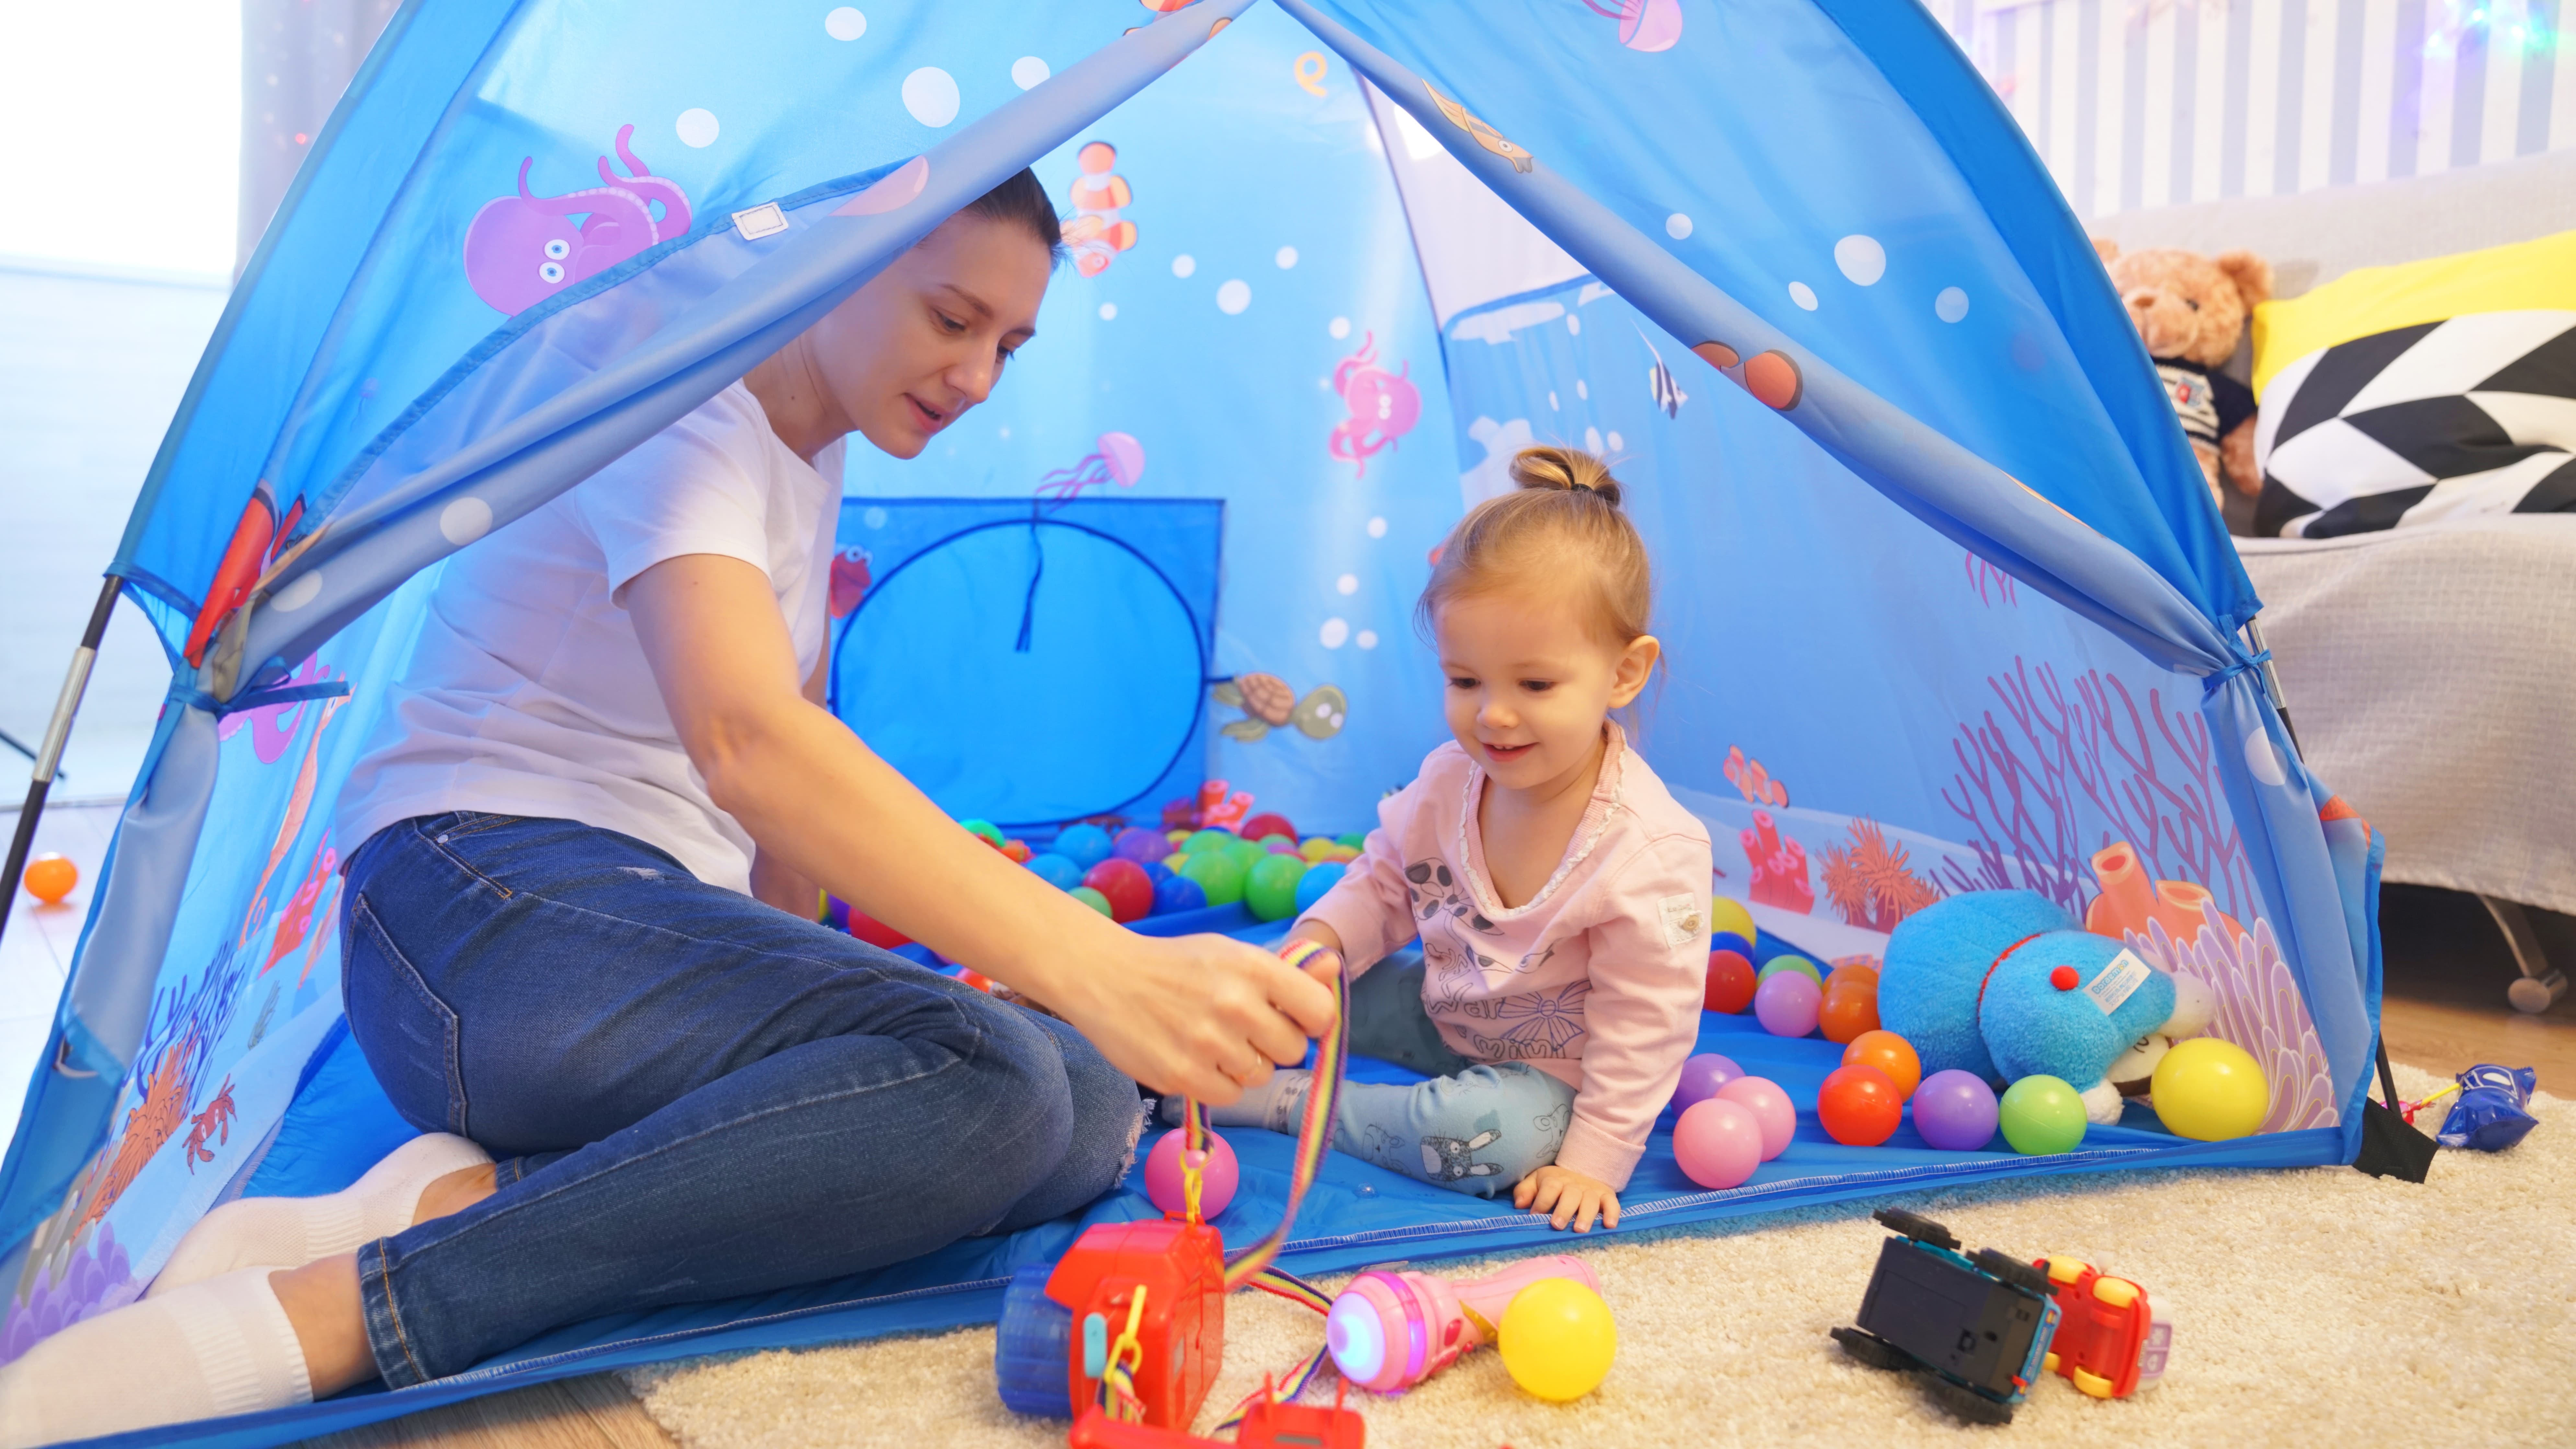 Homfu Play Tent for Kids Playhouse for Children Boys Popup Tent (Blue) Homfu Play Tent for Kids Playhouse for Children Boys Popup Tent (Blue) 